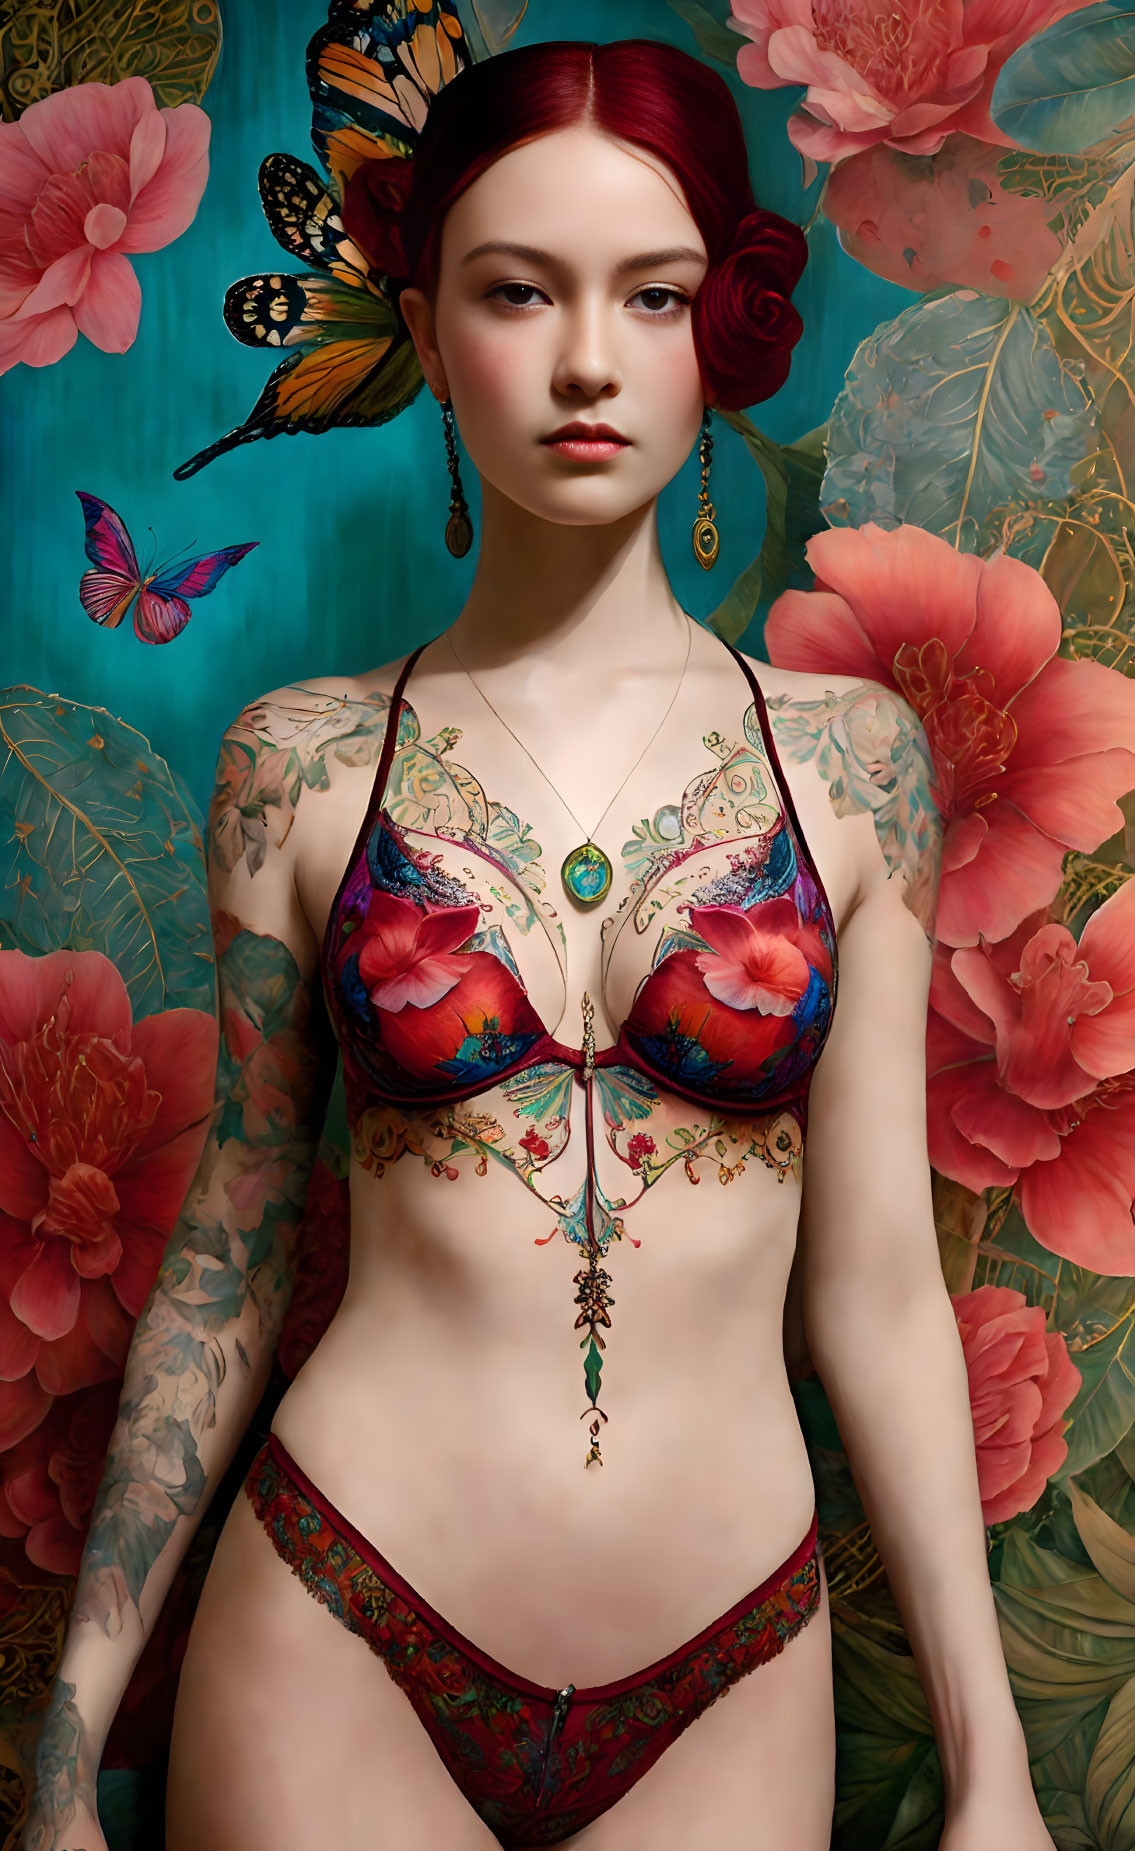 Red-haired woman with floral tattoos and jewelry against blue backdrop with butterflies and flowers